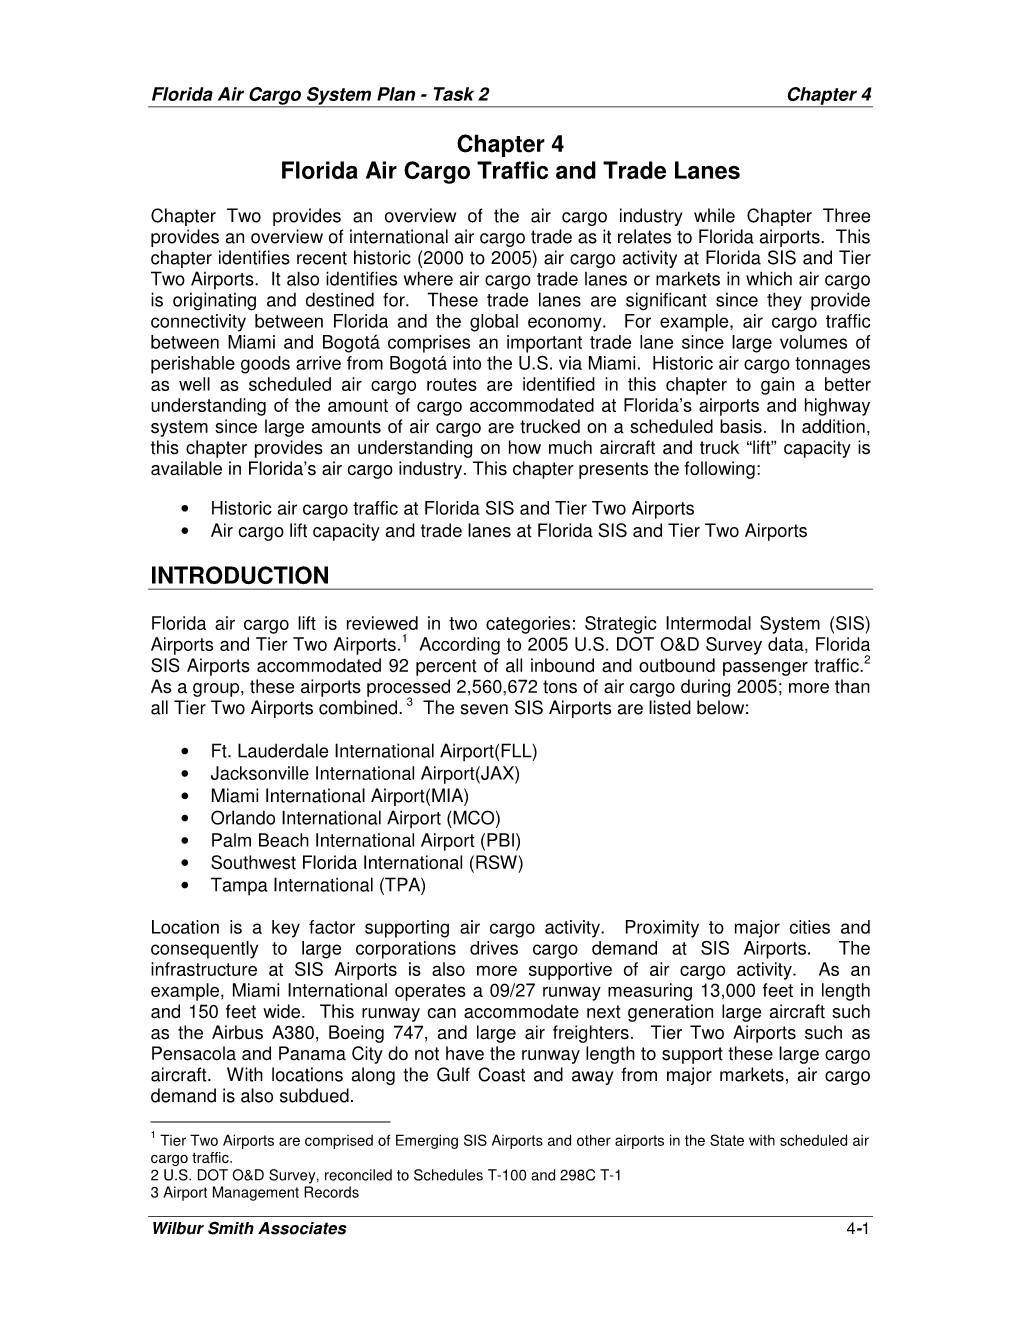 Chapter 4 Florida Air Cargo Traffic and Trade Lanes INTRODUCTION